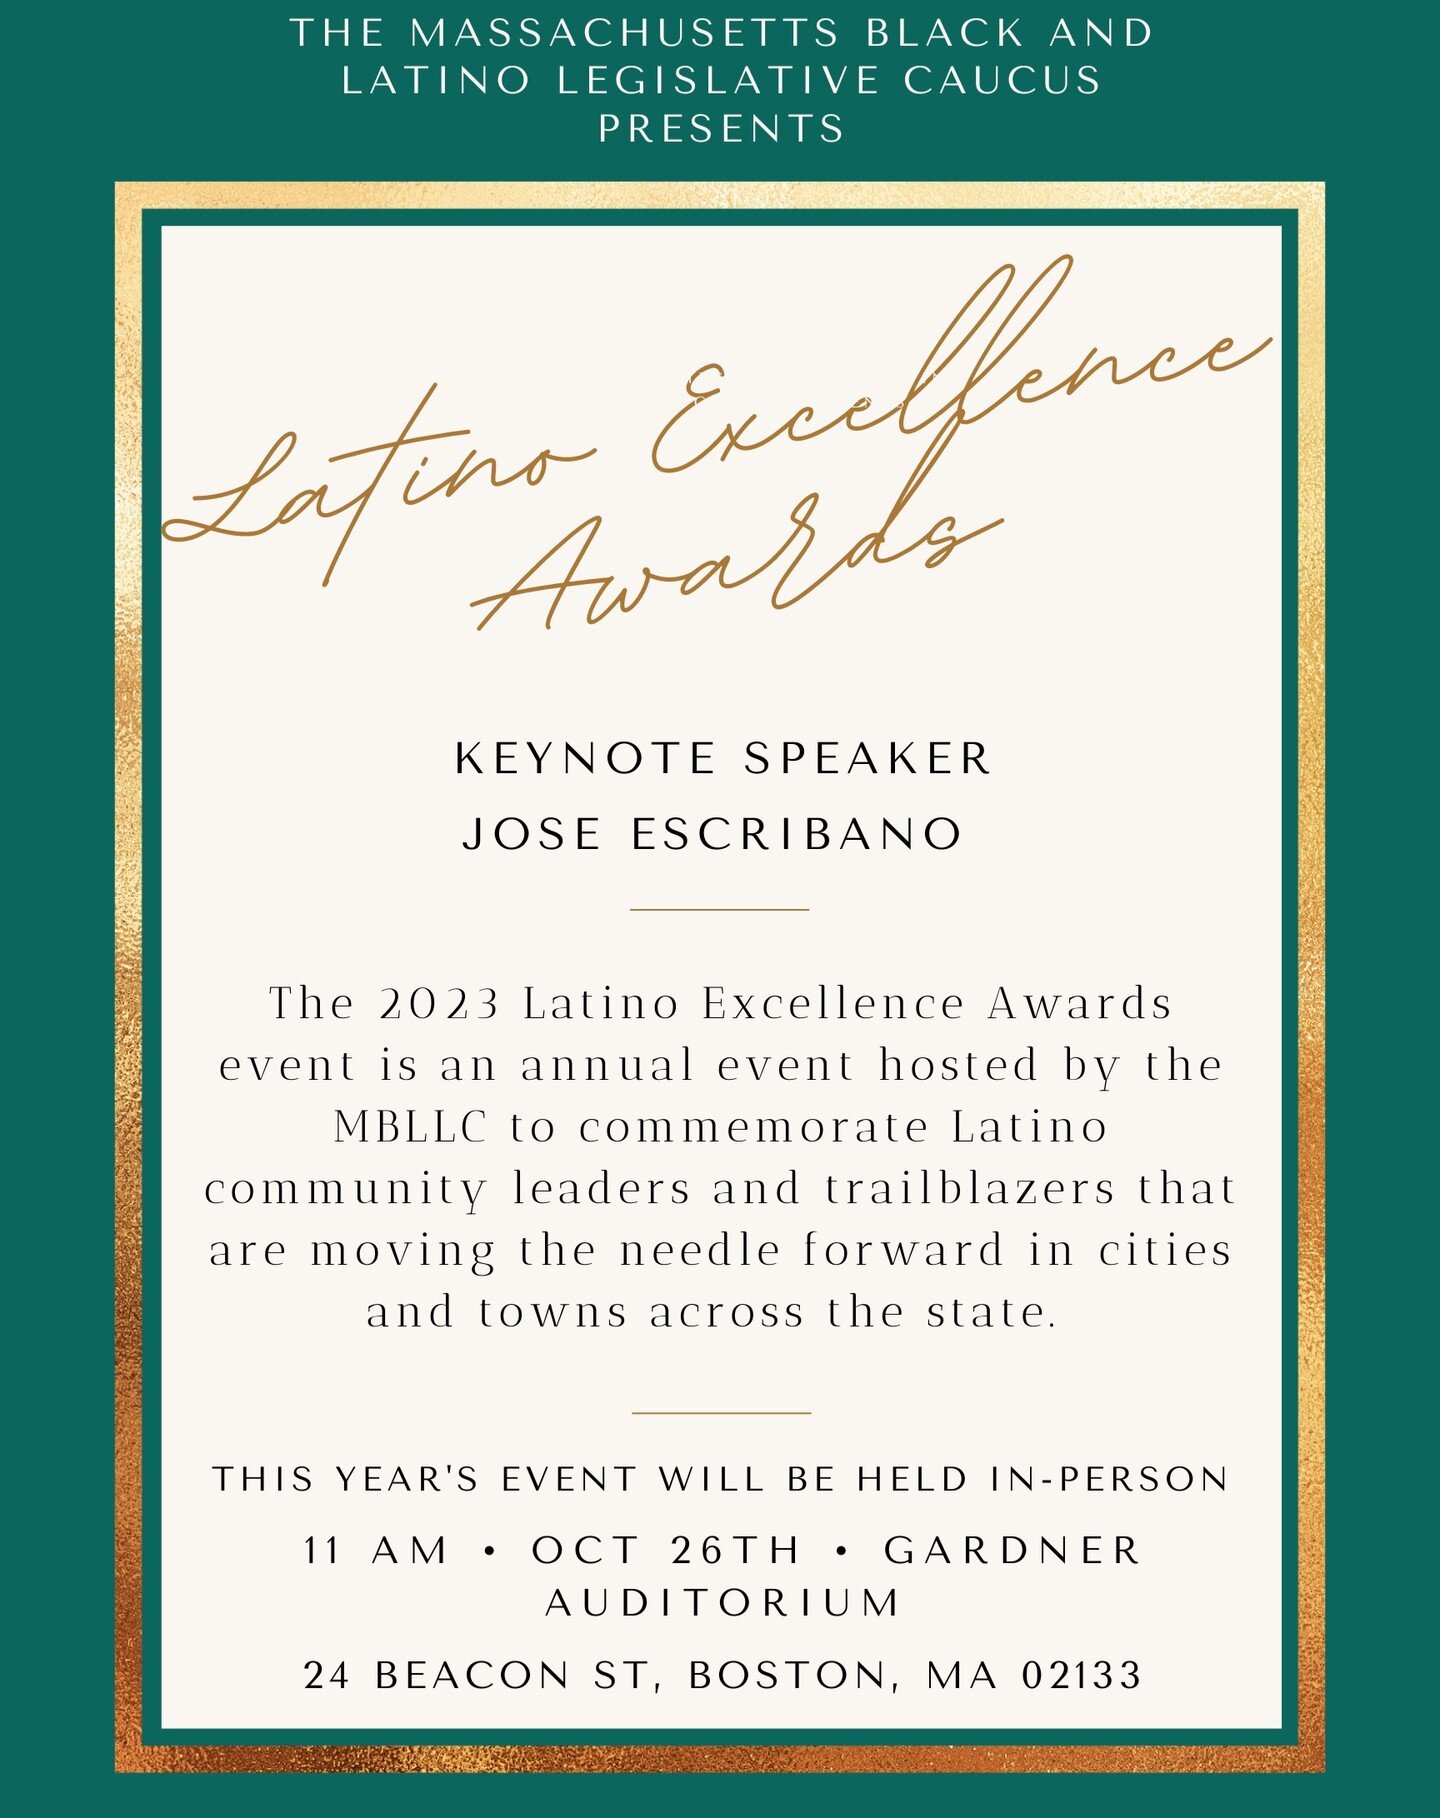 EVENT ANNOUCEMENT! Please join us in-person next Thursday @ 11:00am EST for the Massachusetts Black and Latino Caucus' premier latino culture celebration-- the Latino Excellence Awards. The event will take place at the Massachusetts State House, on O